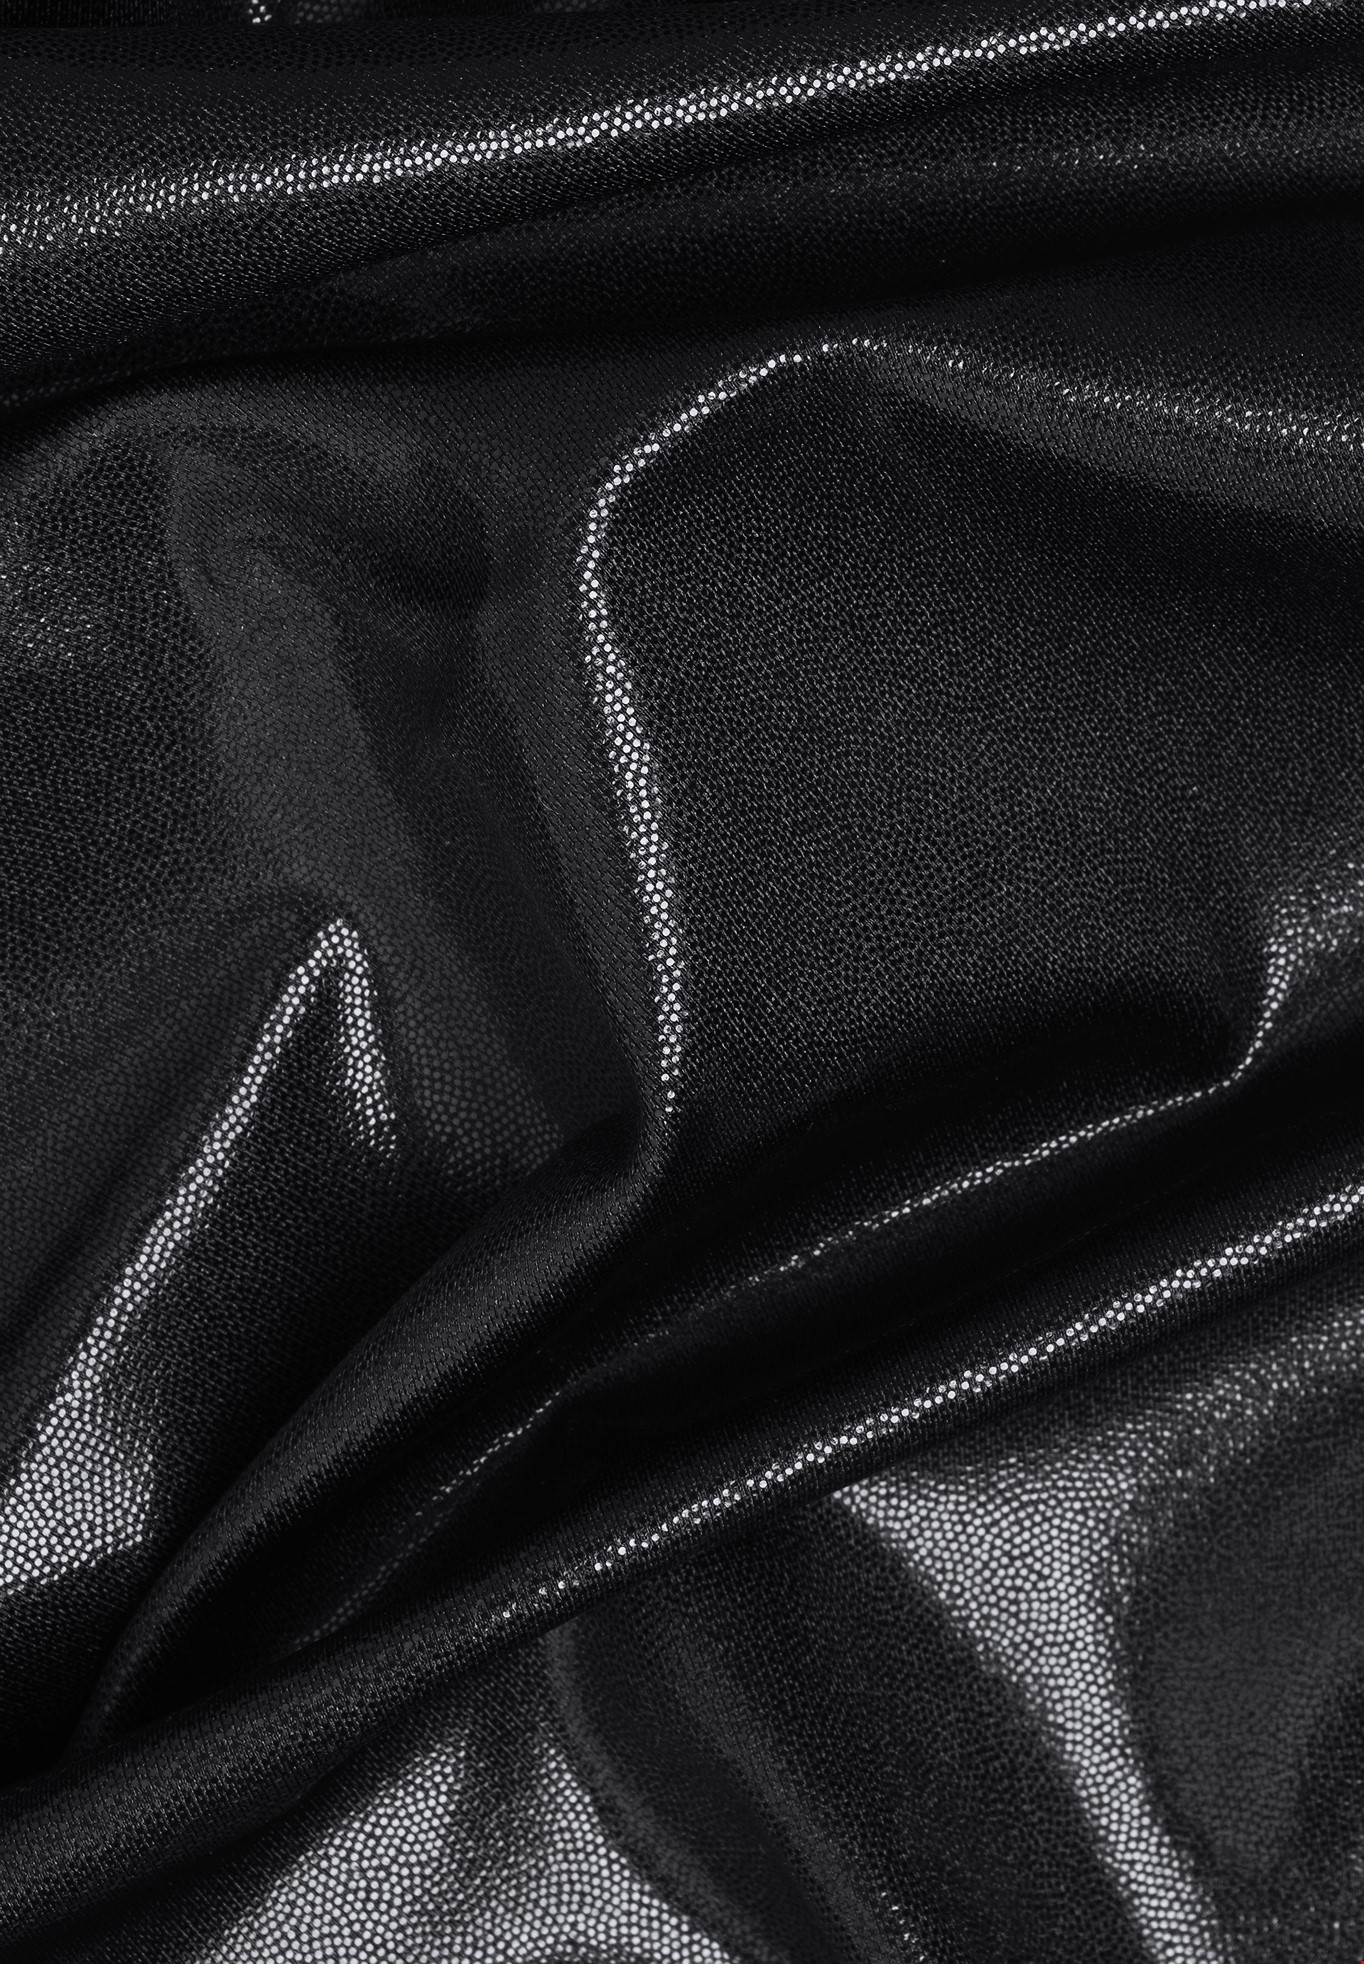 Black Shiny Lycra fabric per 10 meters for Clothing: Dance